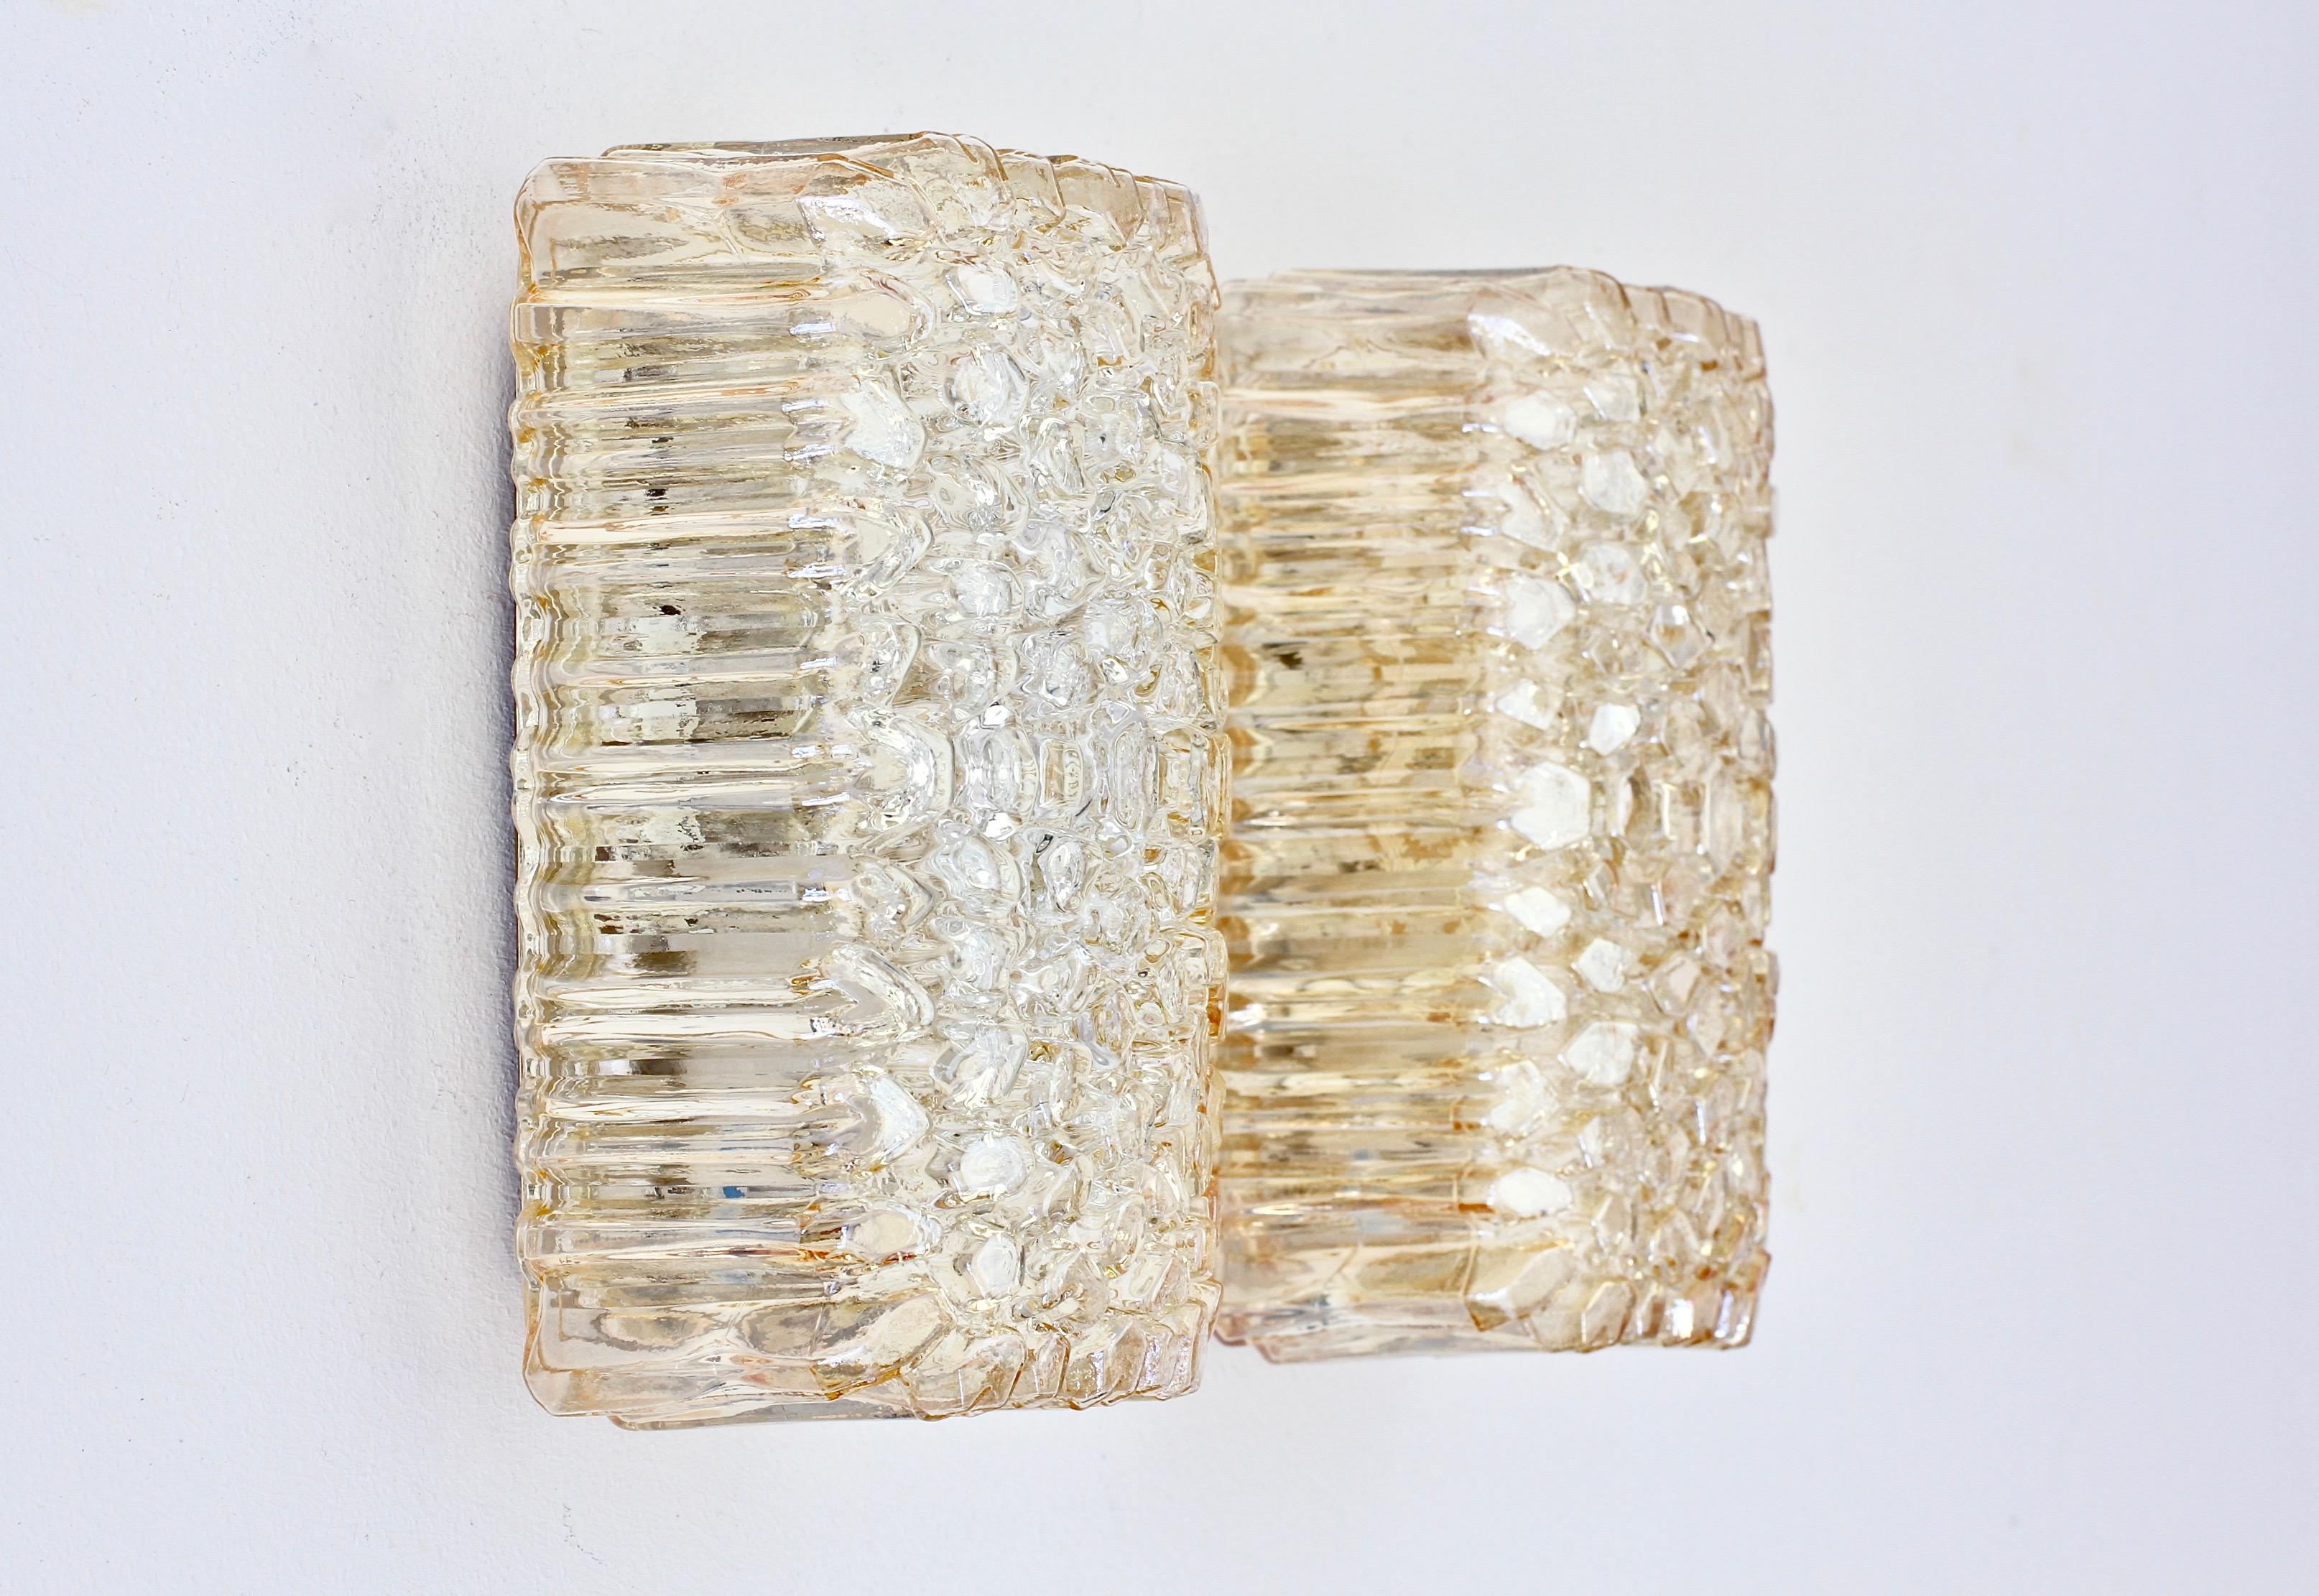 Limburg Glashütte pair of flush mount light fixtures or wall-mounted sconces, circa 1970s. Featuring wonderful German made mouth blown, molded and textured champagne colored or amber toned glass shades resembling ice crystals. These midcentury